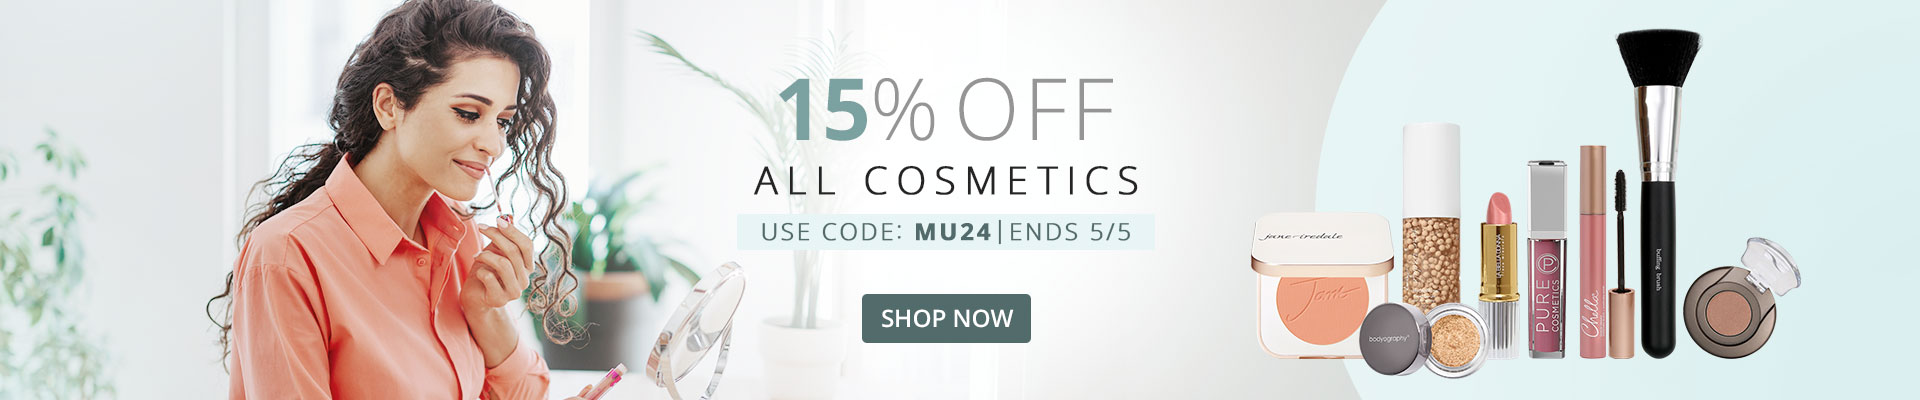 15% Off All Cosmetics | Use Code: MU24 - Ends 5/5 | Shop Now